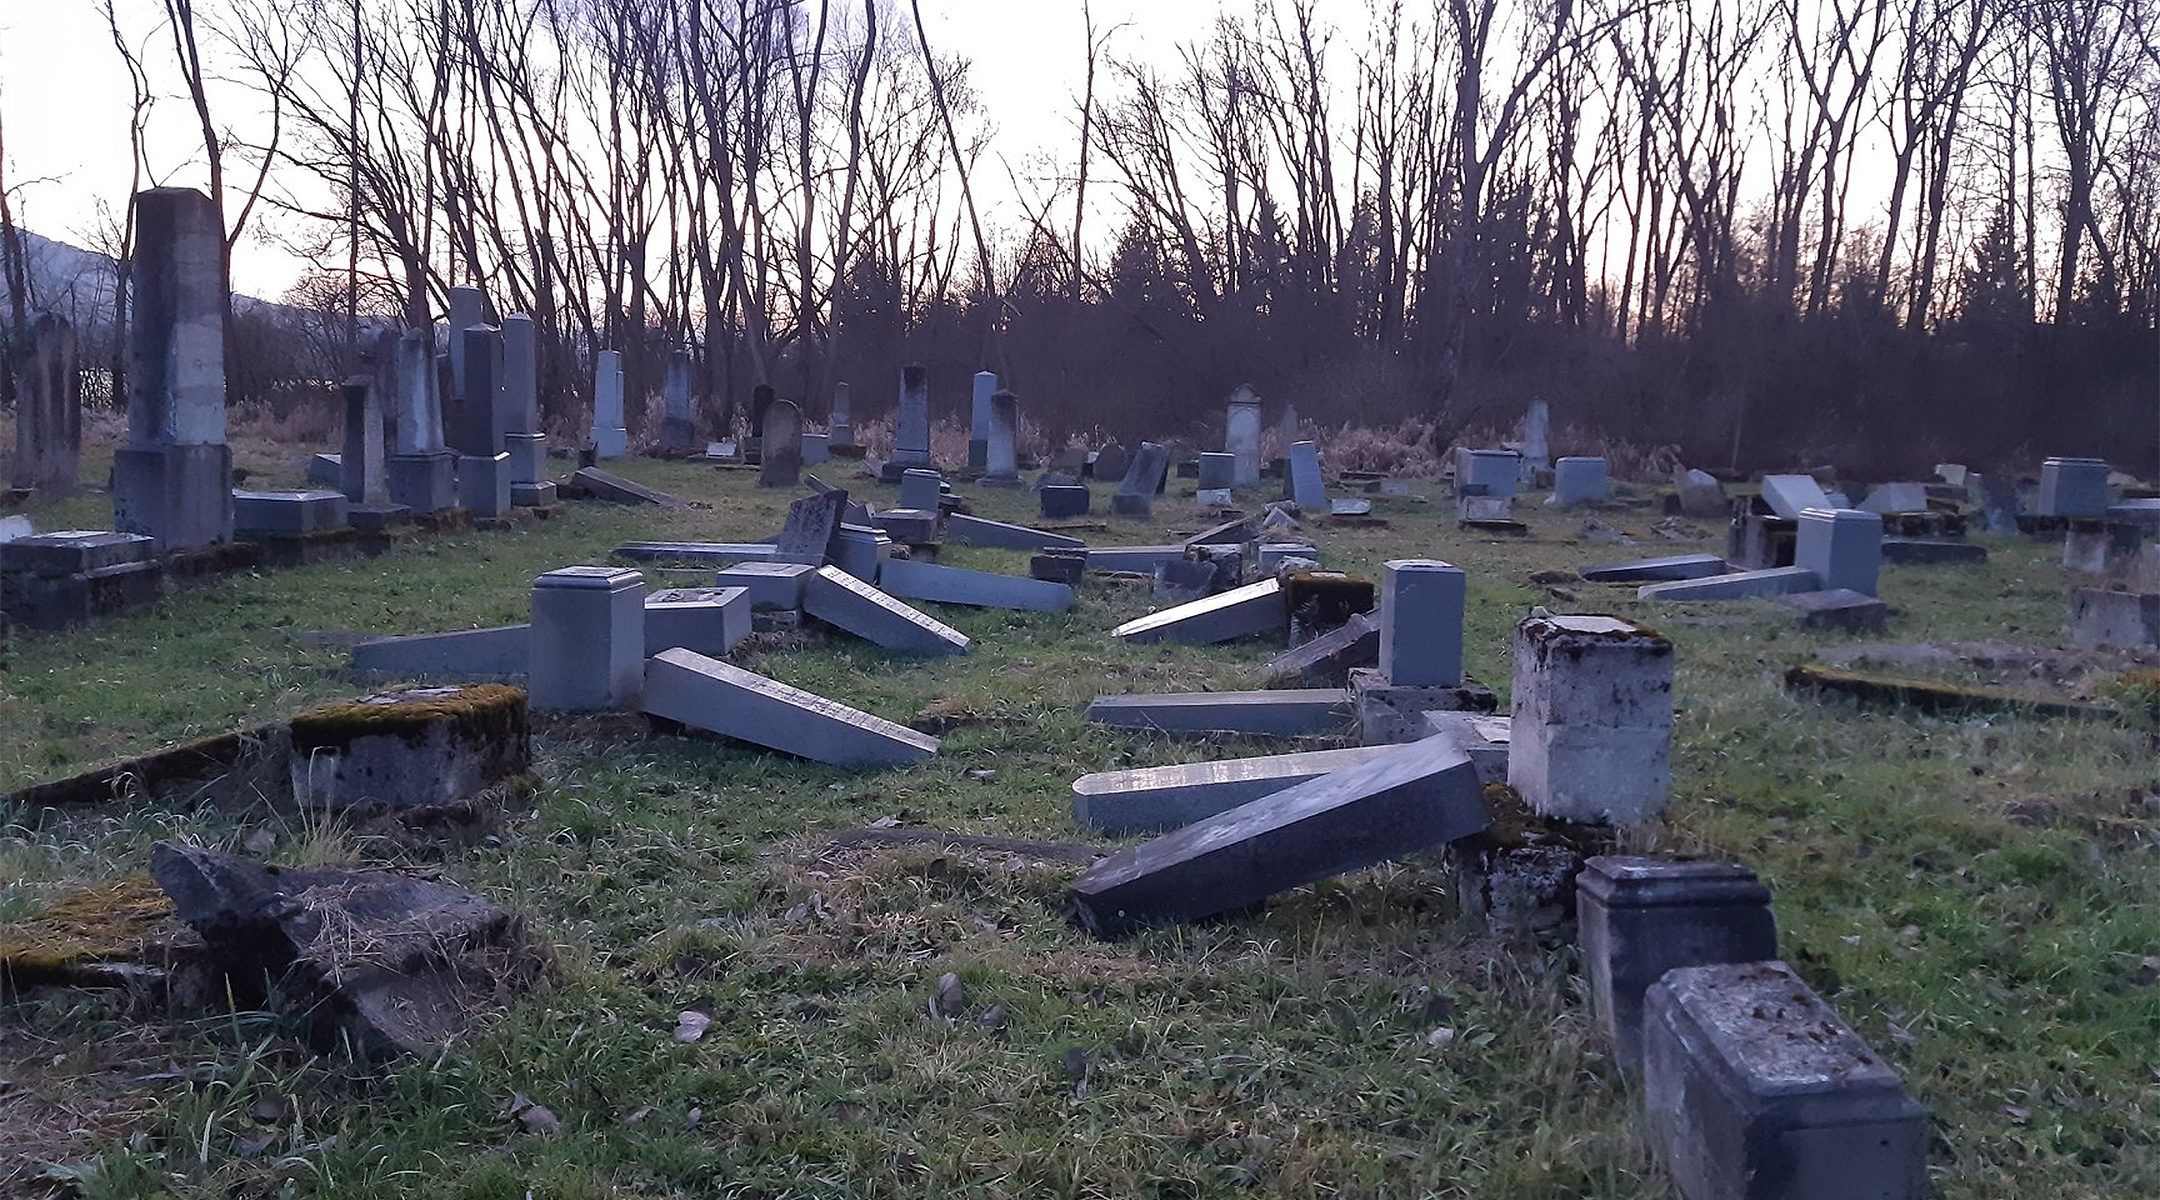 The aftermath of vandalism at the ancient Jewish cemetery of Námestovo, Slovakia in December 2019. (Courtesy of ZCN)